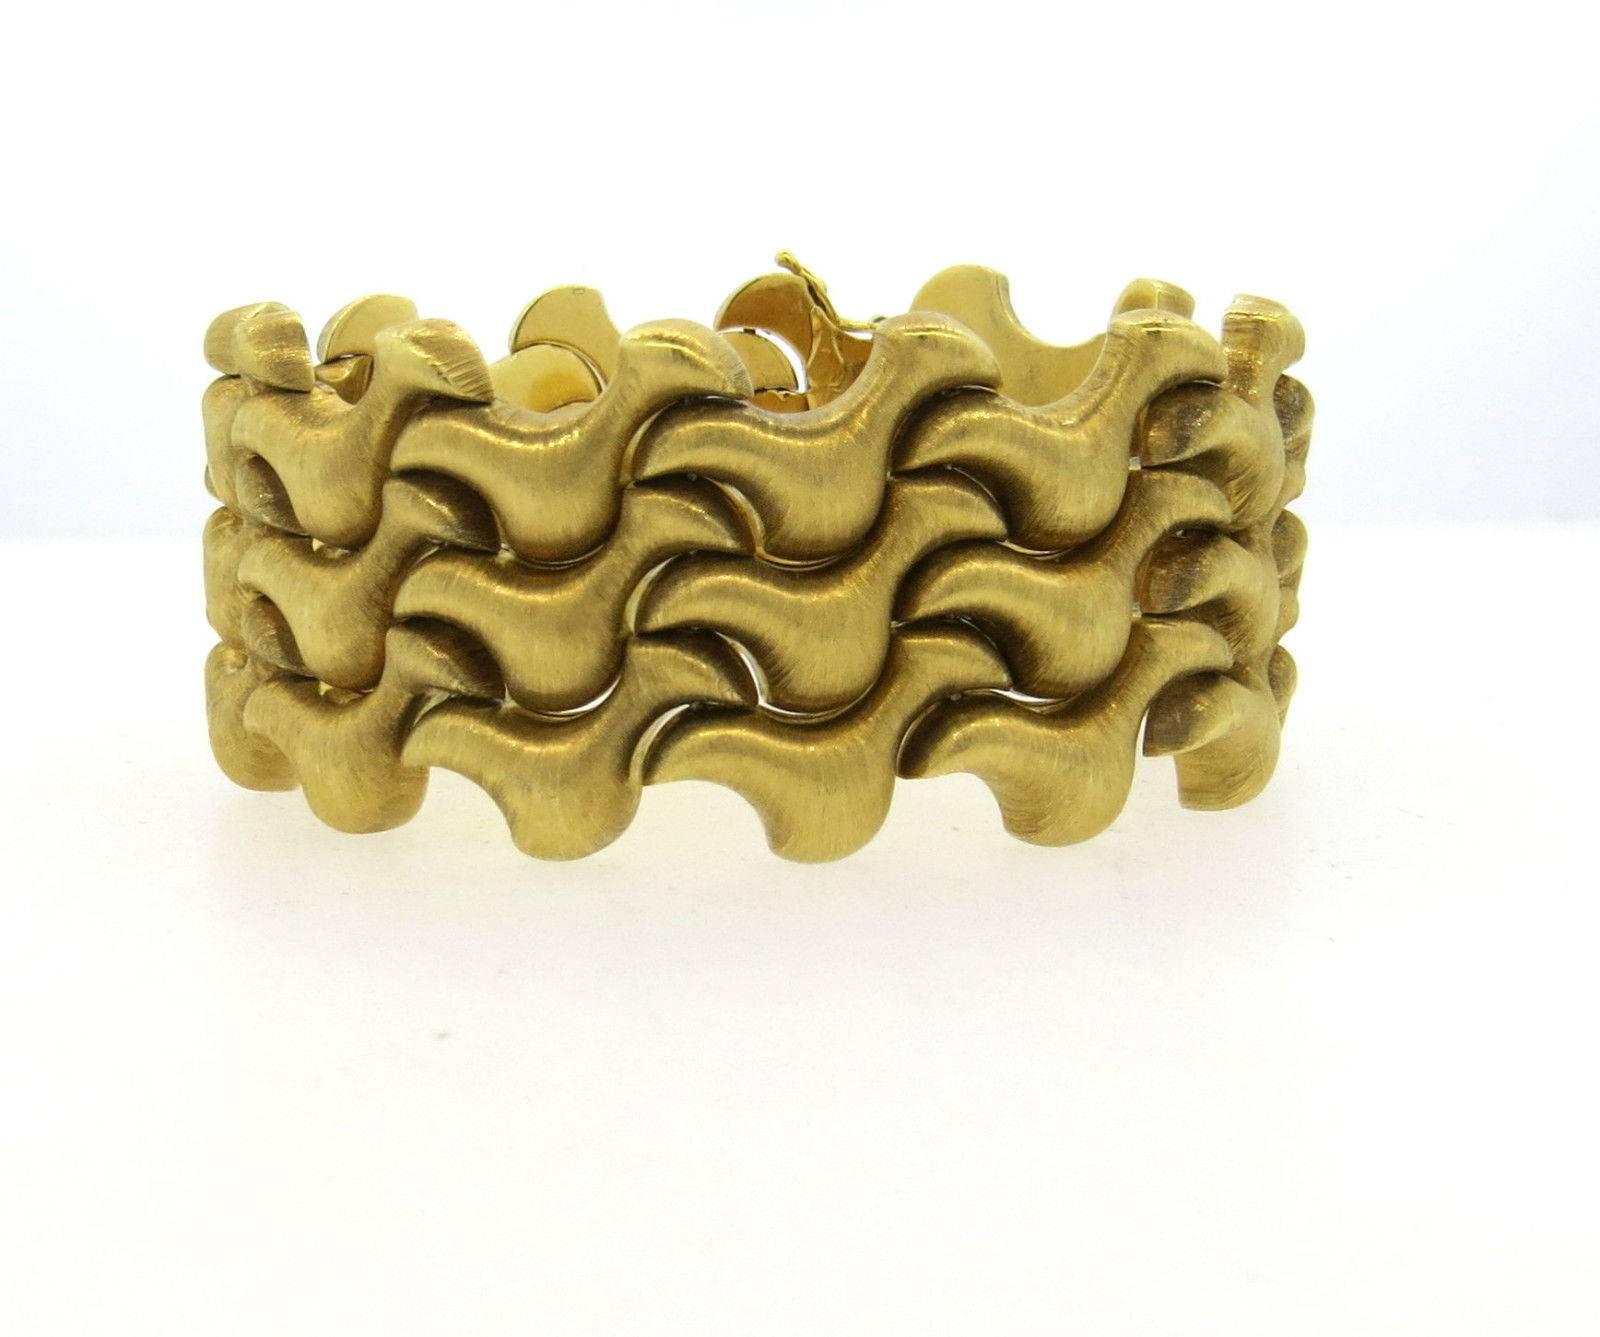 An 18k yellow gold bracelet.  Crafted by Mario Buccellati, the bracelet is 6 7/8